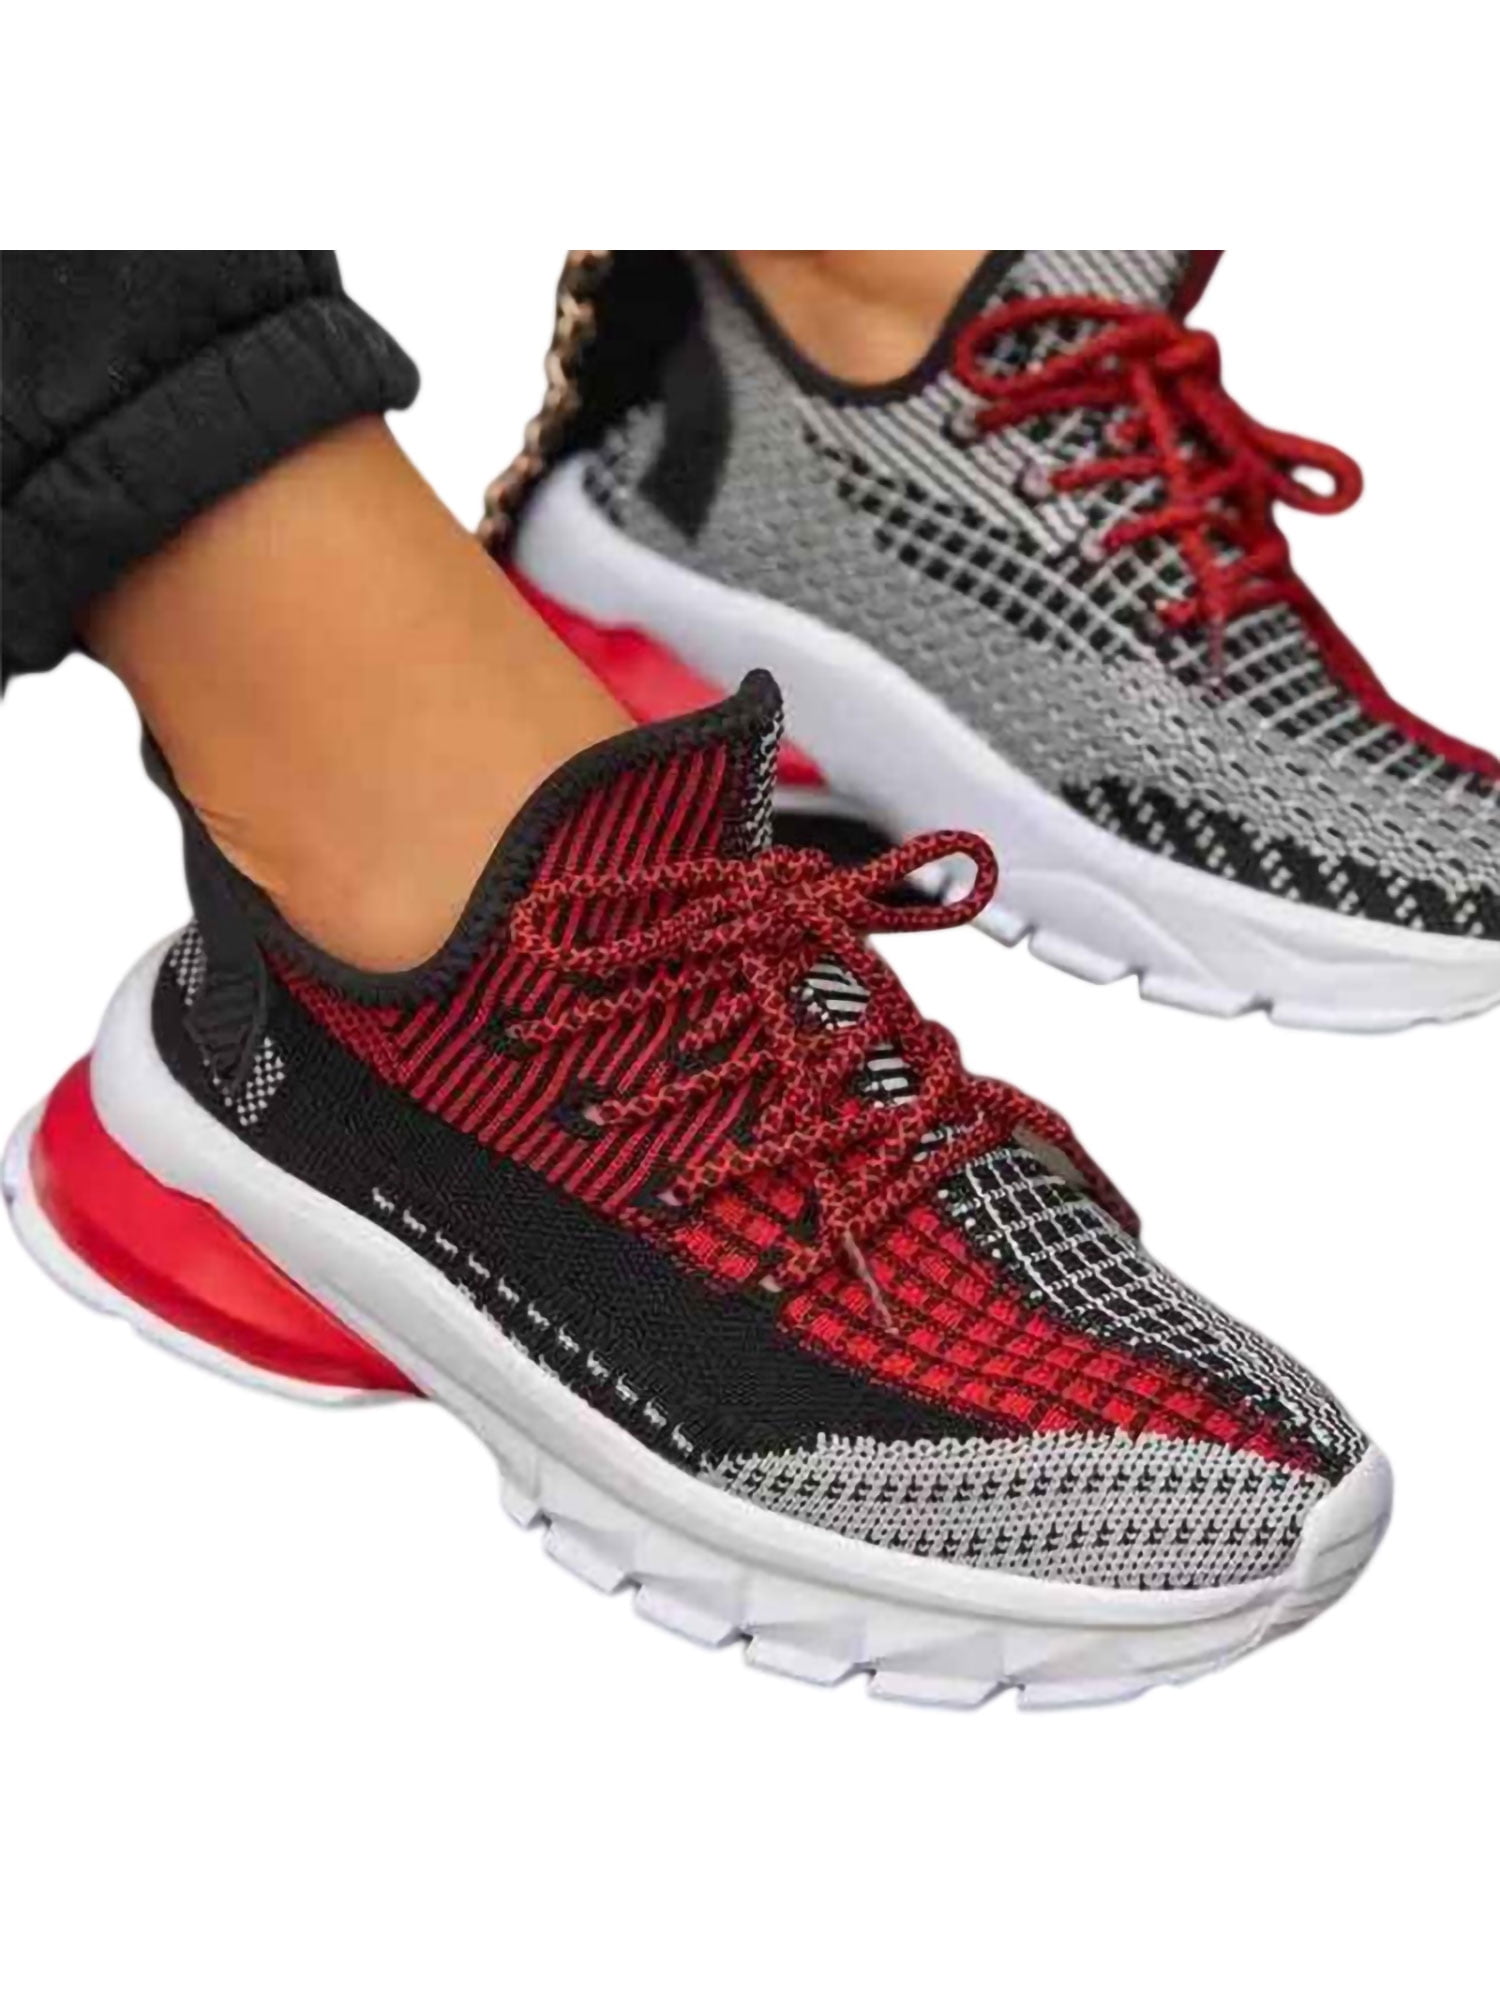 New Womens Slip On Trainers Flat Gym Lace Up Comfy Lightweight Ladies Shoes 